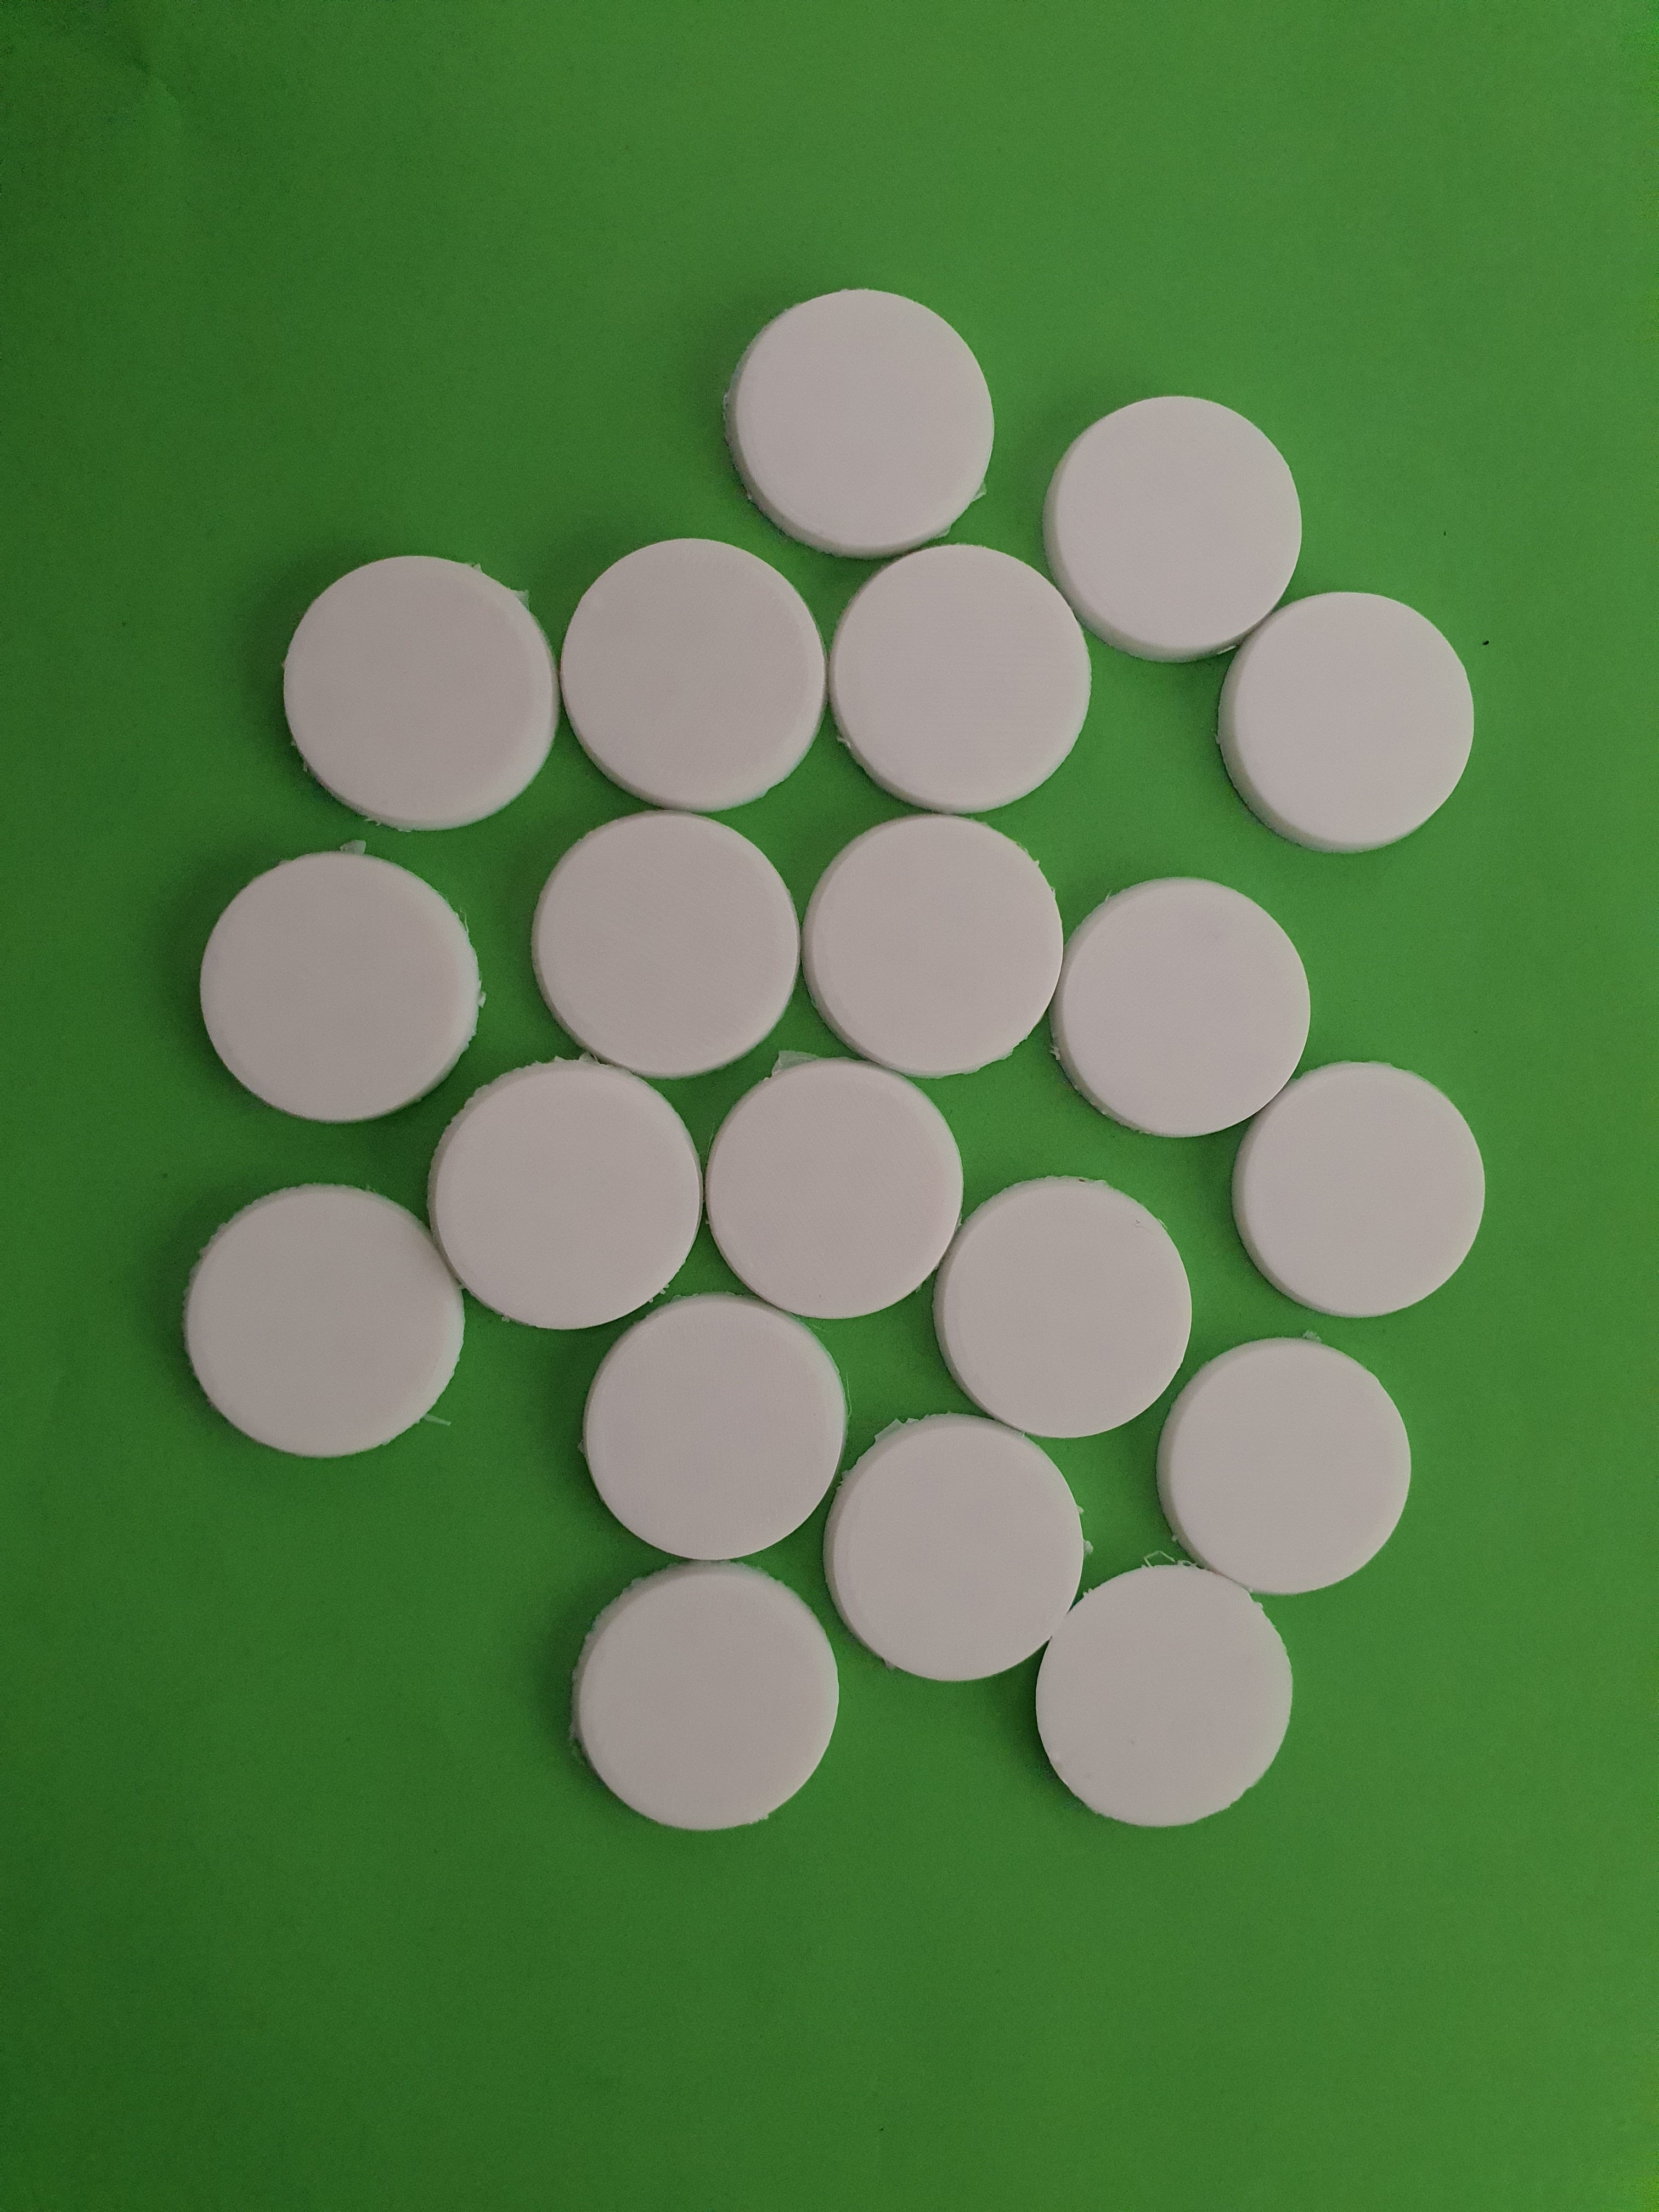 Pack of 20x of 25mm x 25 mm Bases | Cracking-Singles